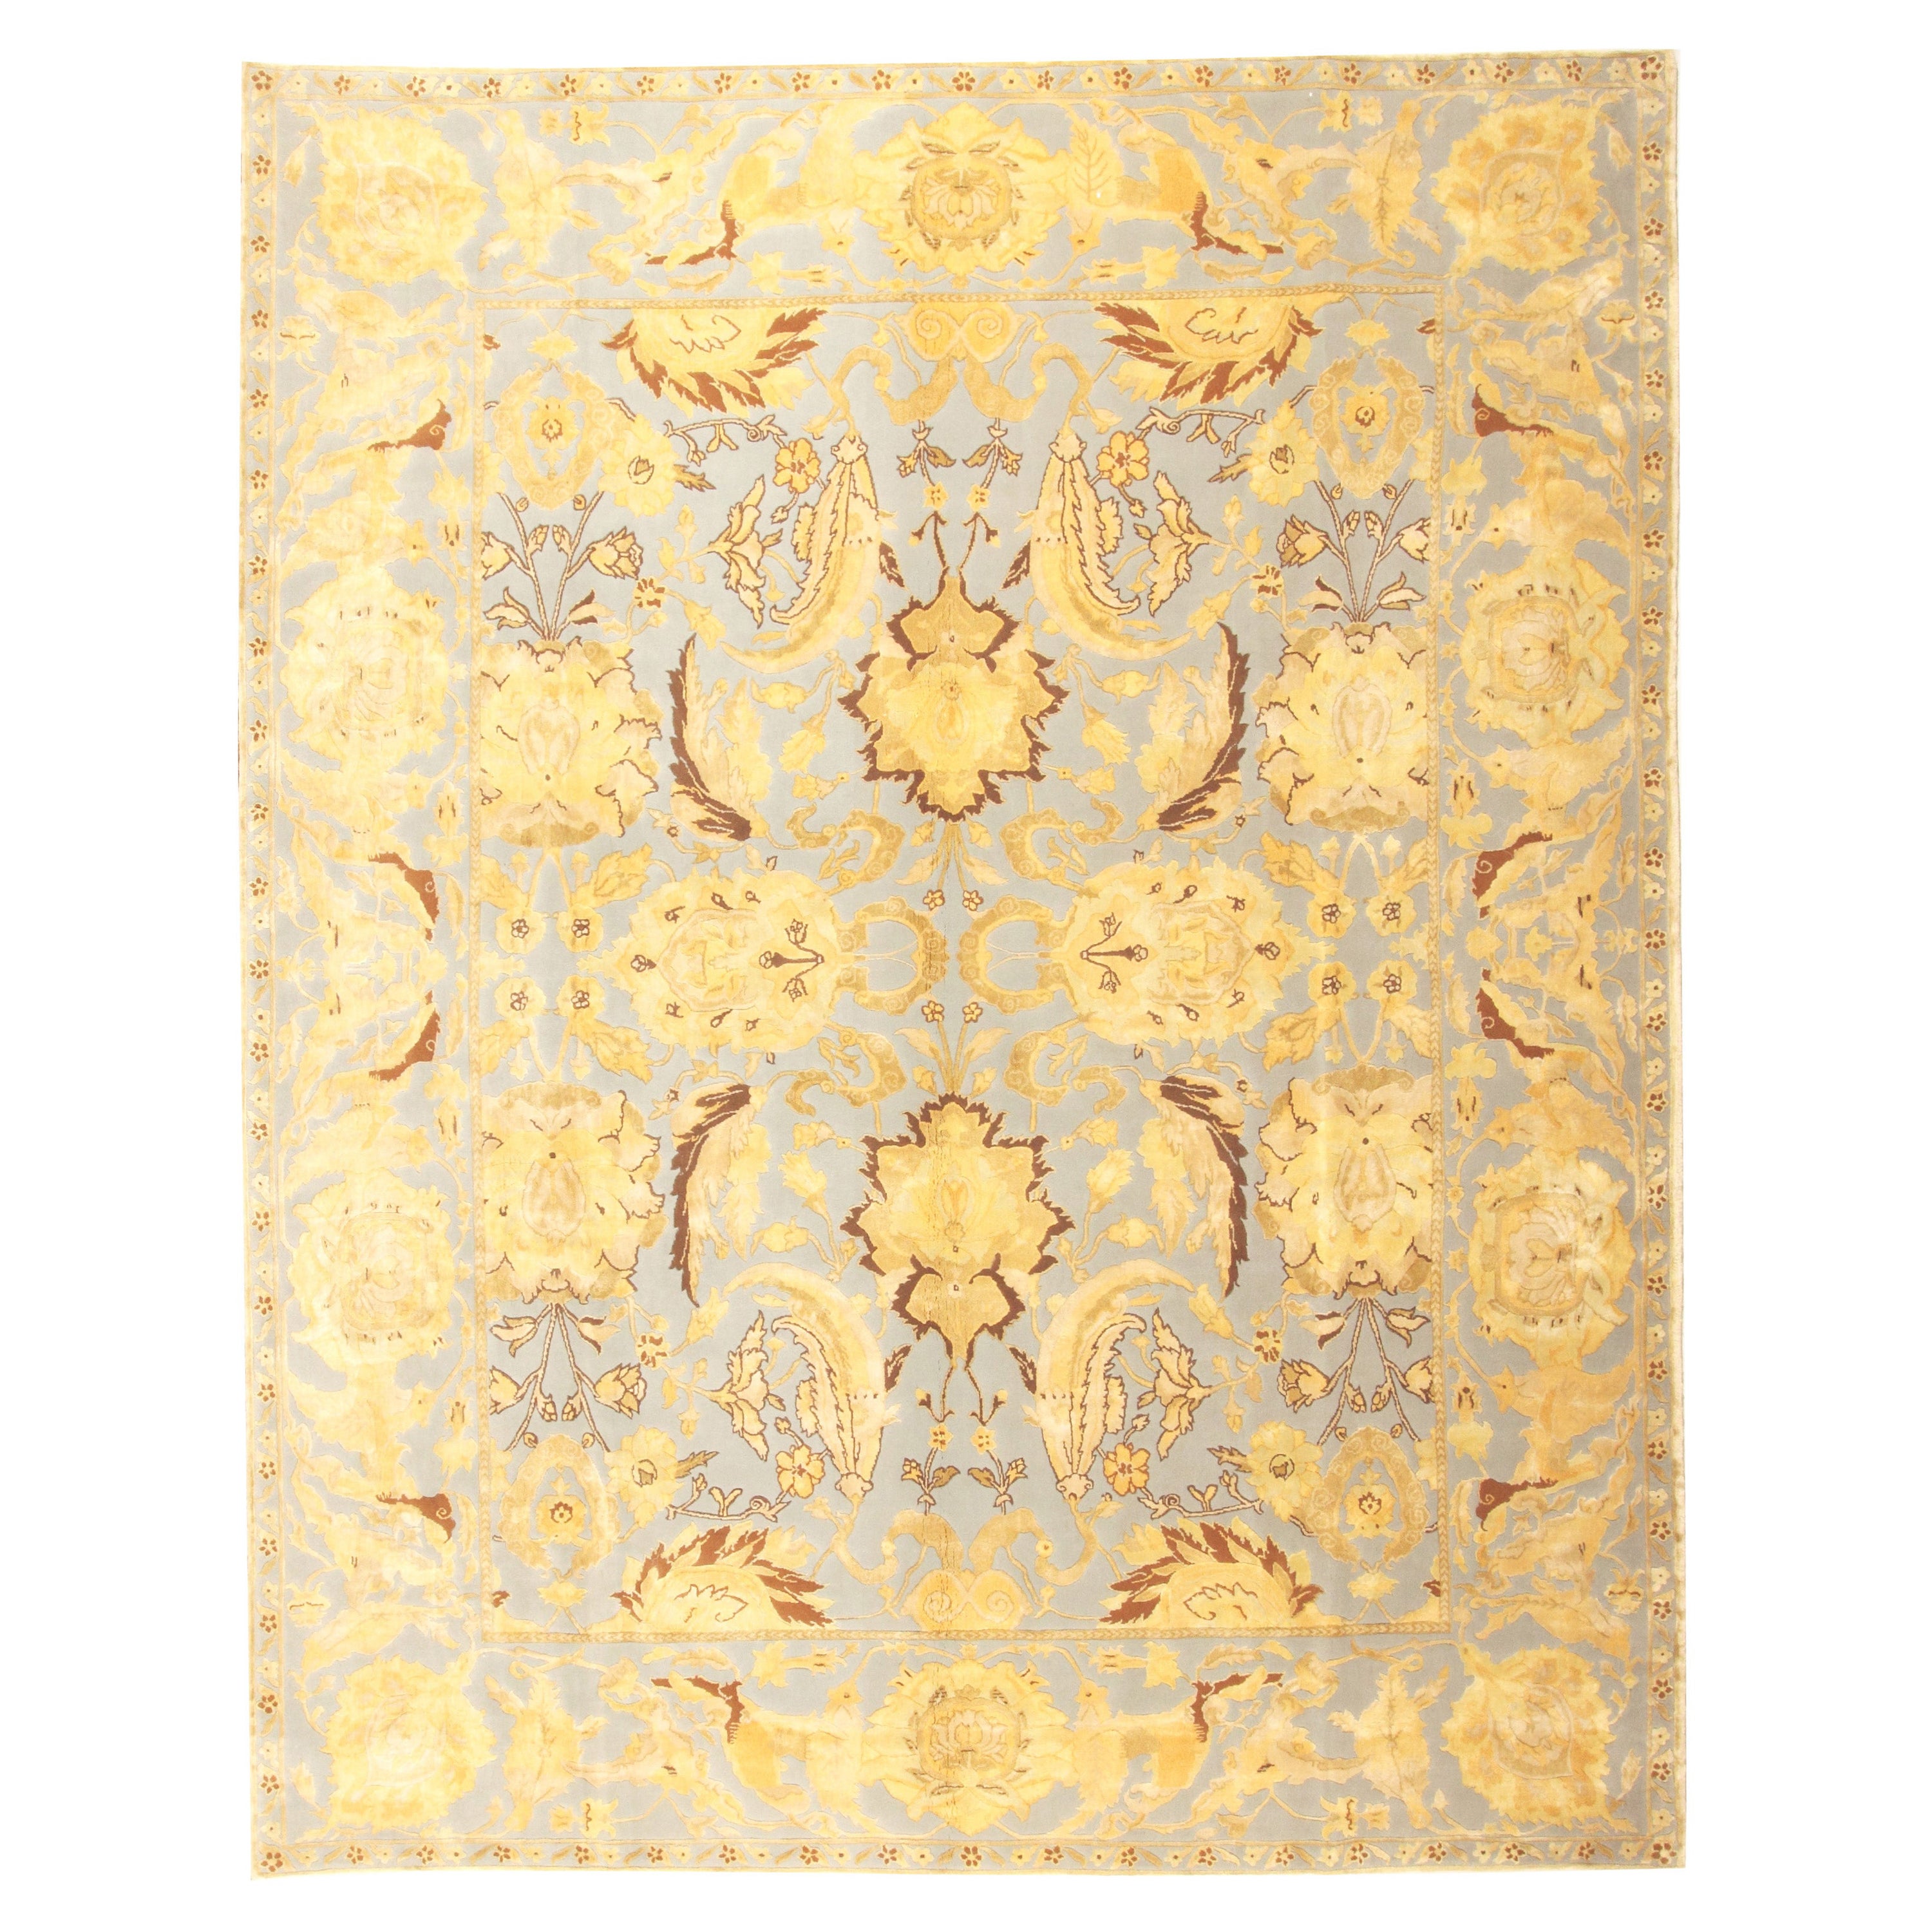 Via Como, 'Vonier' Rug feet Wool and Silk Hand Knotted Rug